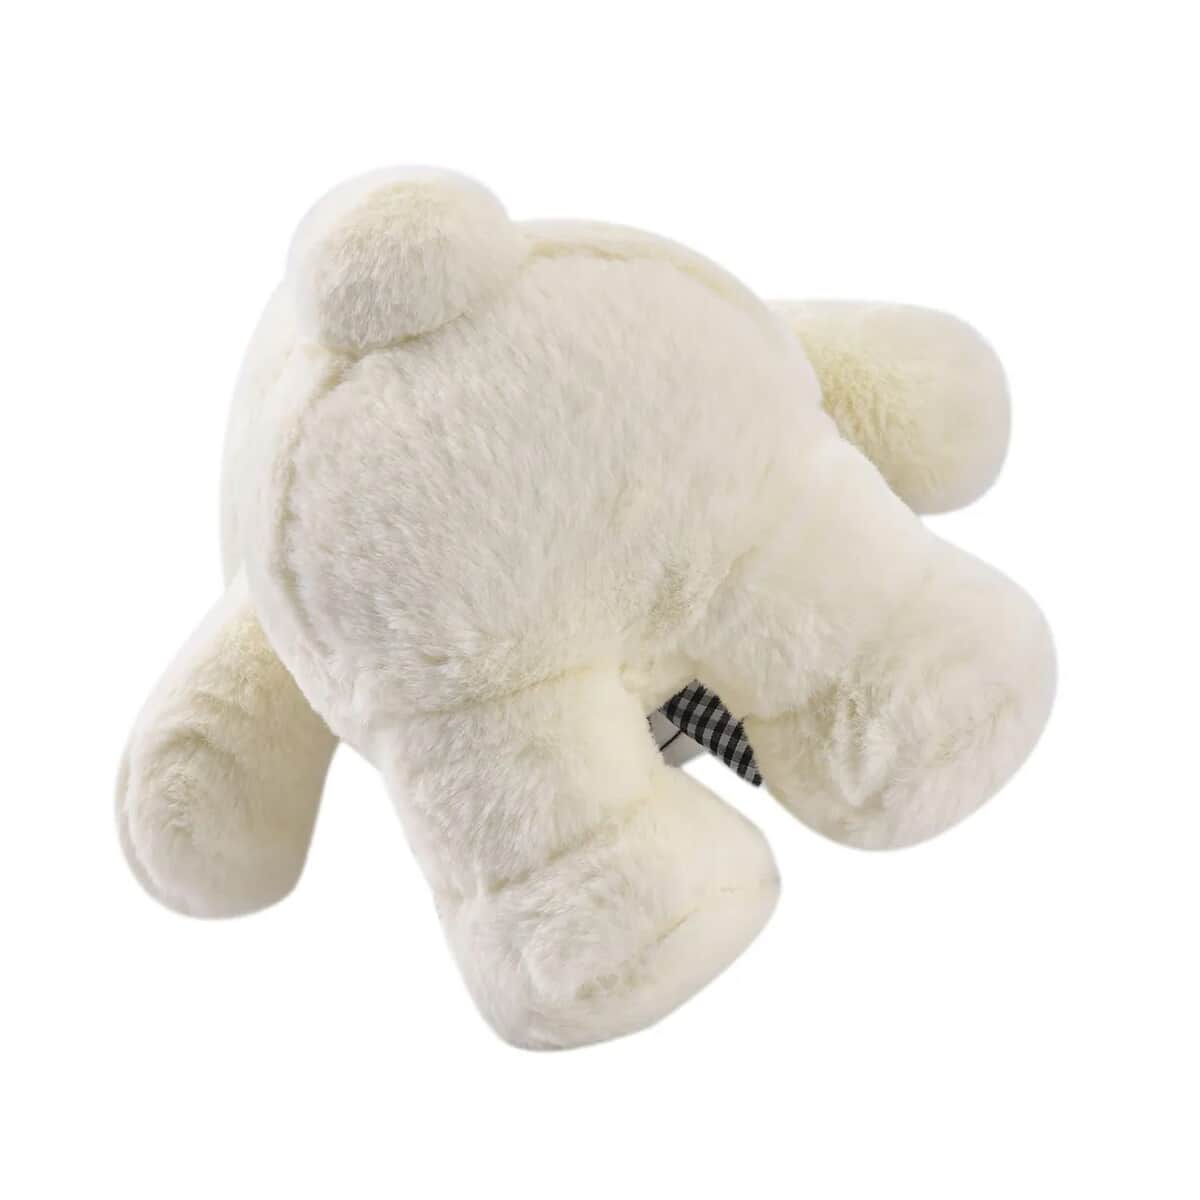 Off White Teddy Bear Toy with Zipper Bag (10 In) image number 5